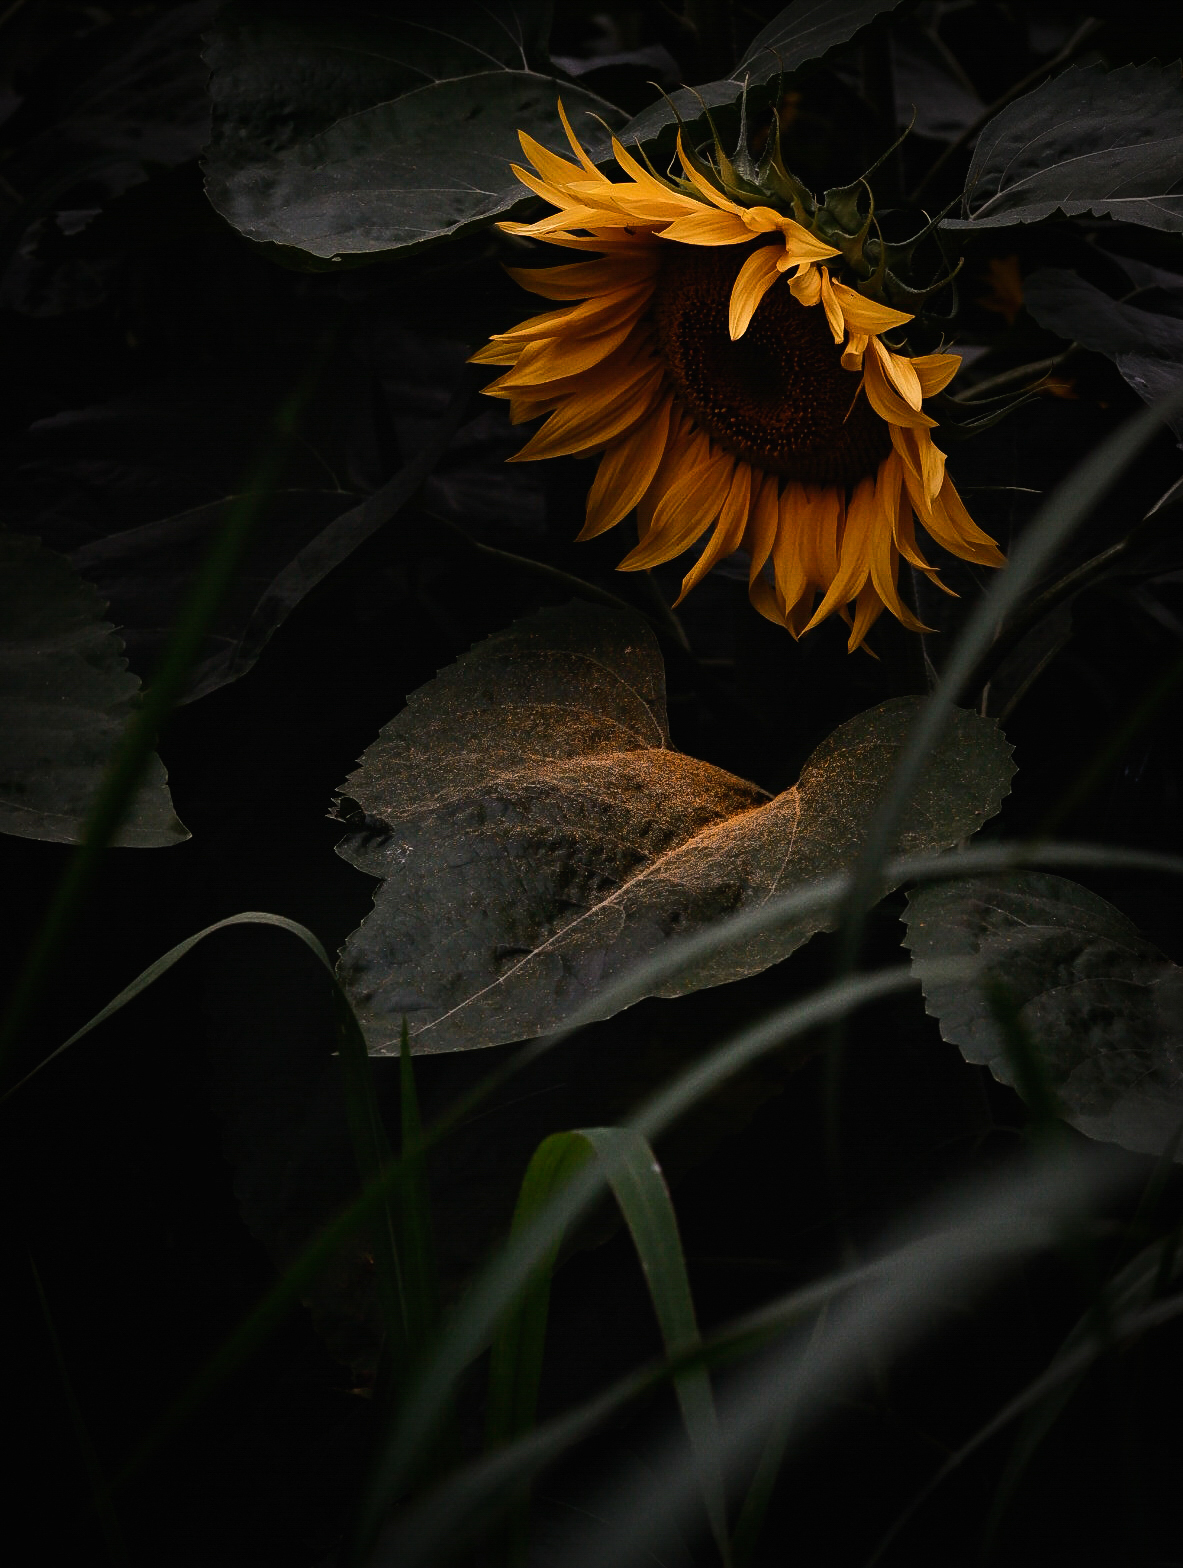 The melancholy of a Sunflower...